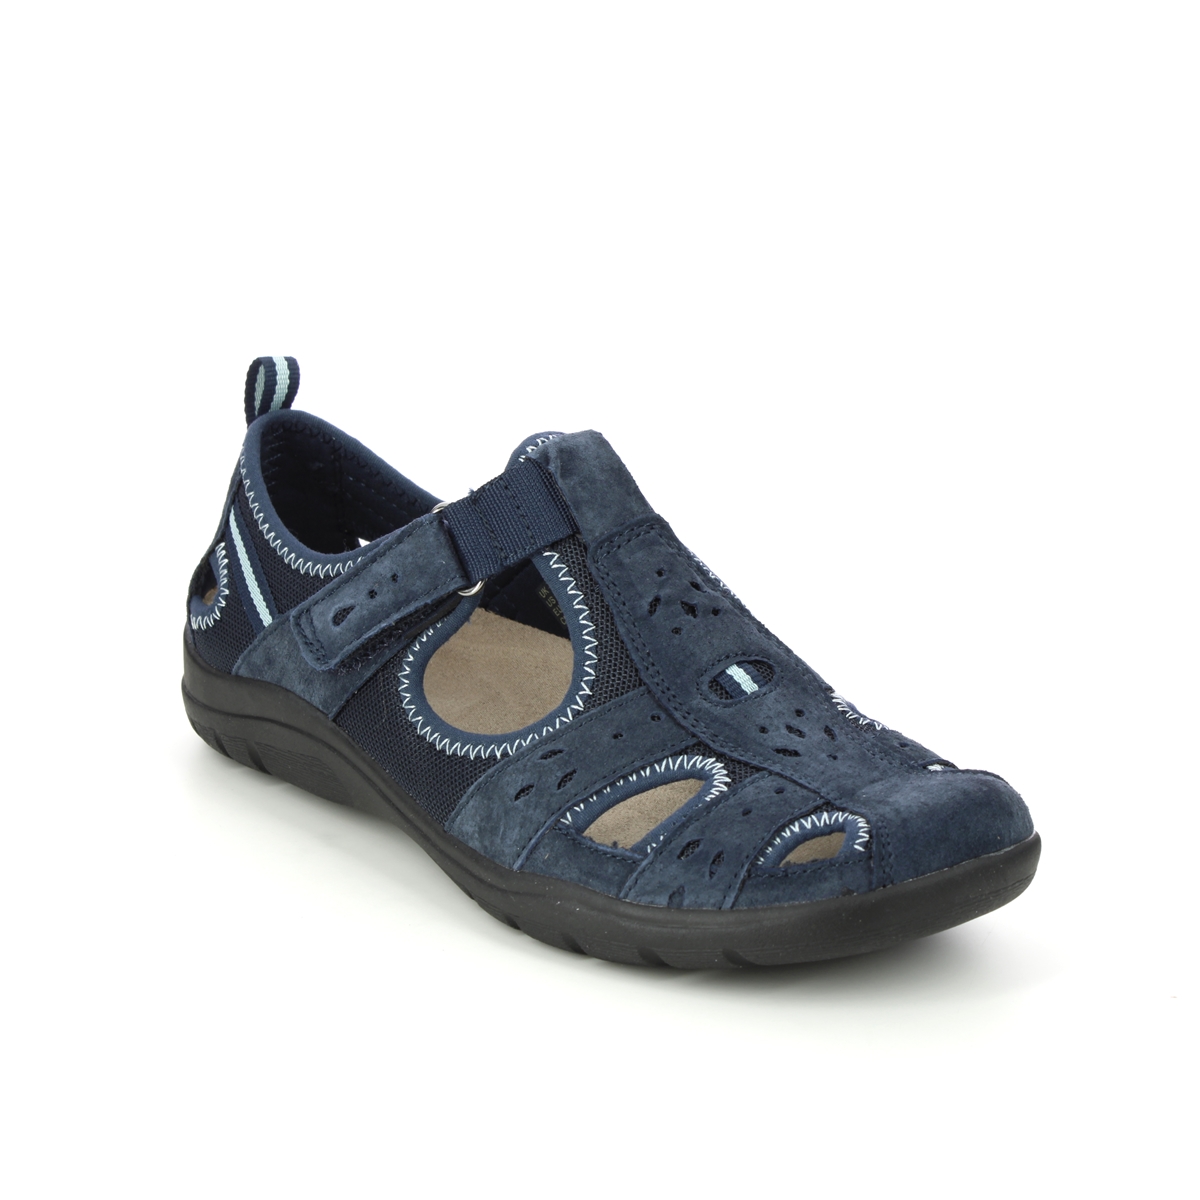 Earth Spirit Cleveland 01 Navy Suede Womens Closed Toe Sandals 40501-73 in a Plain Leather in Size 5